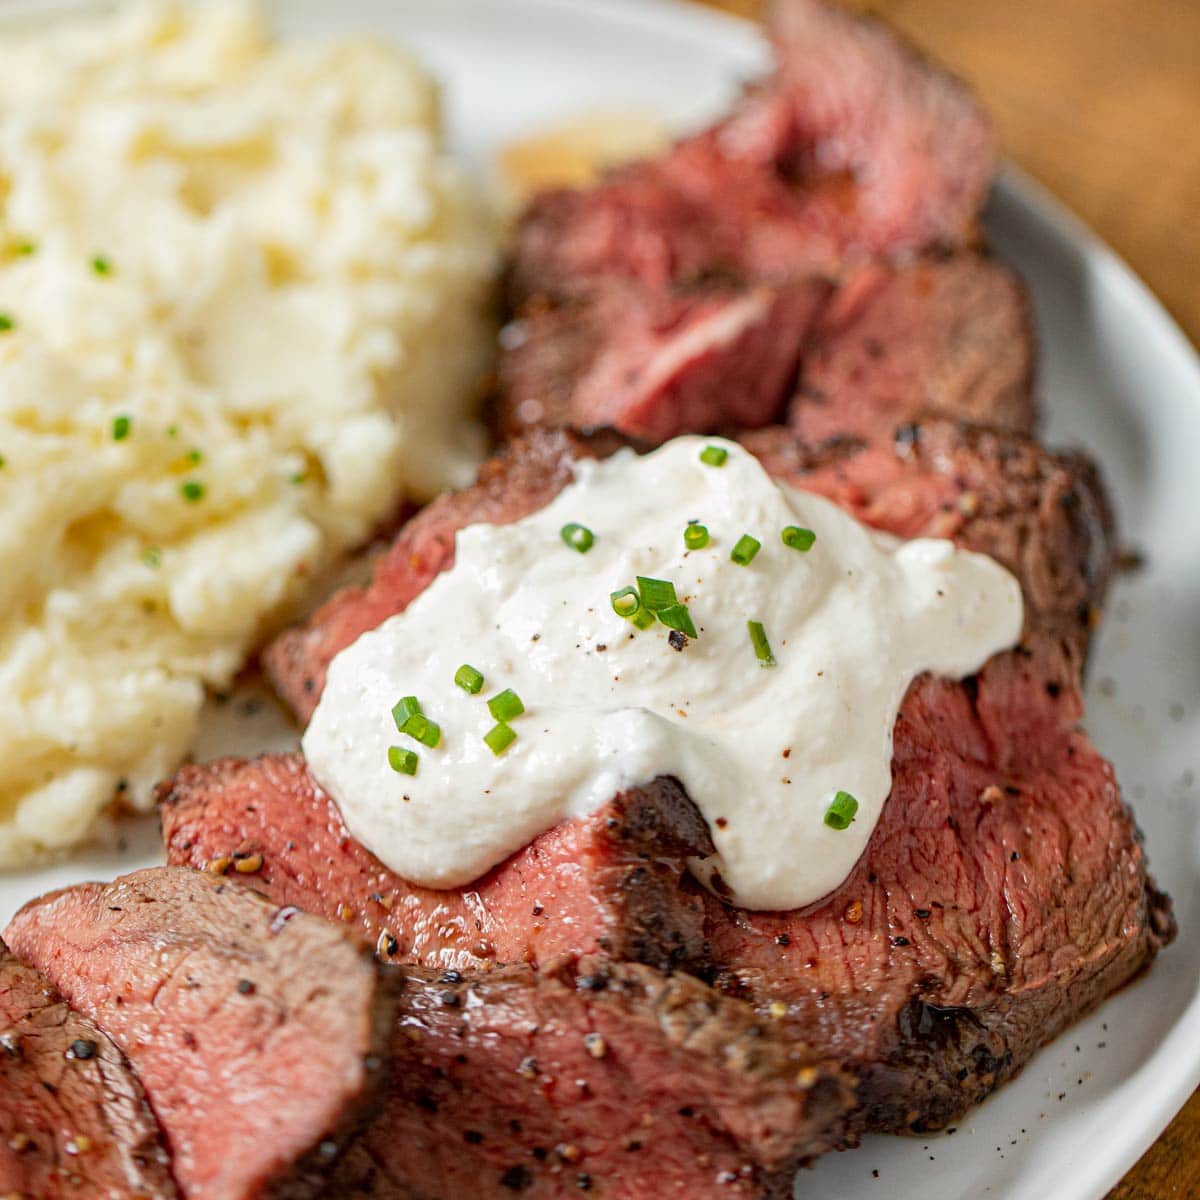 Beef Tenderloin With Mustard Horseradish Sauce - Petite Filet Sandwiches With Horseradish Dijon Sauce Recipe Rachael Ray In Season : Since beef tenderloin doesn't have much fat, it can easily become dry and overcooked.